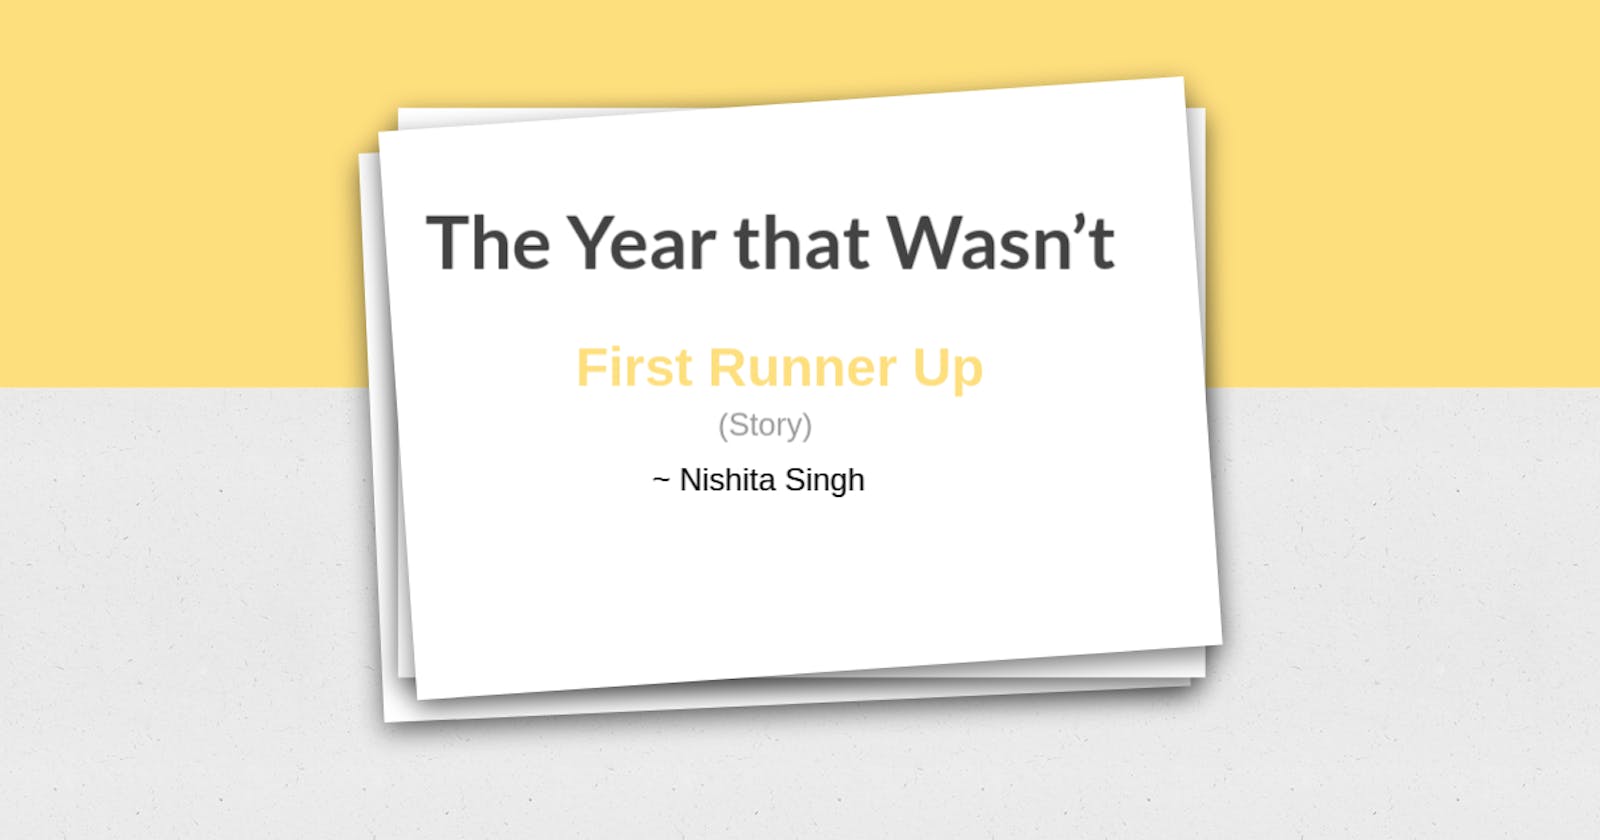 First Runner Up (Story) - The Year that Wasn't